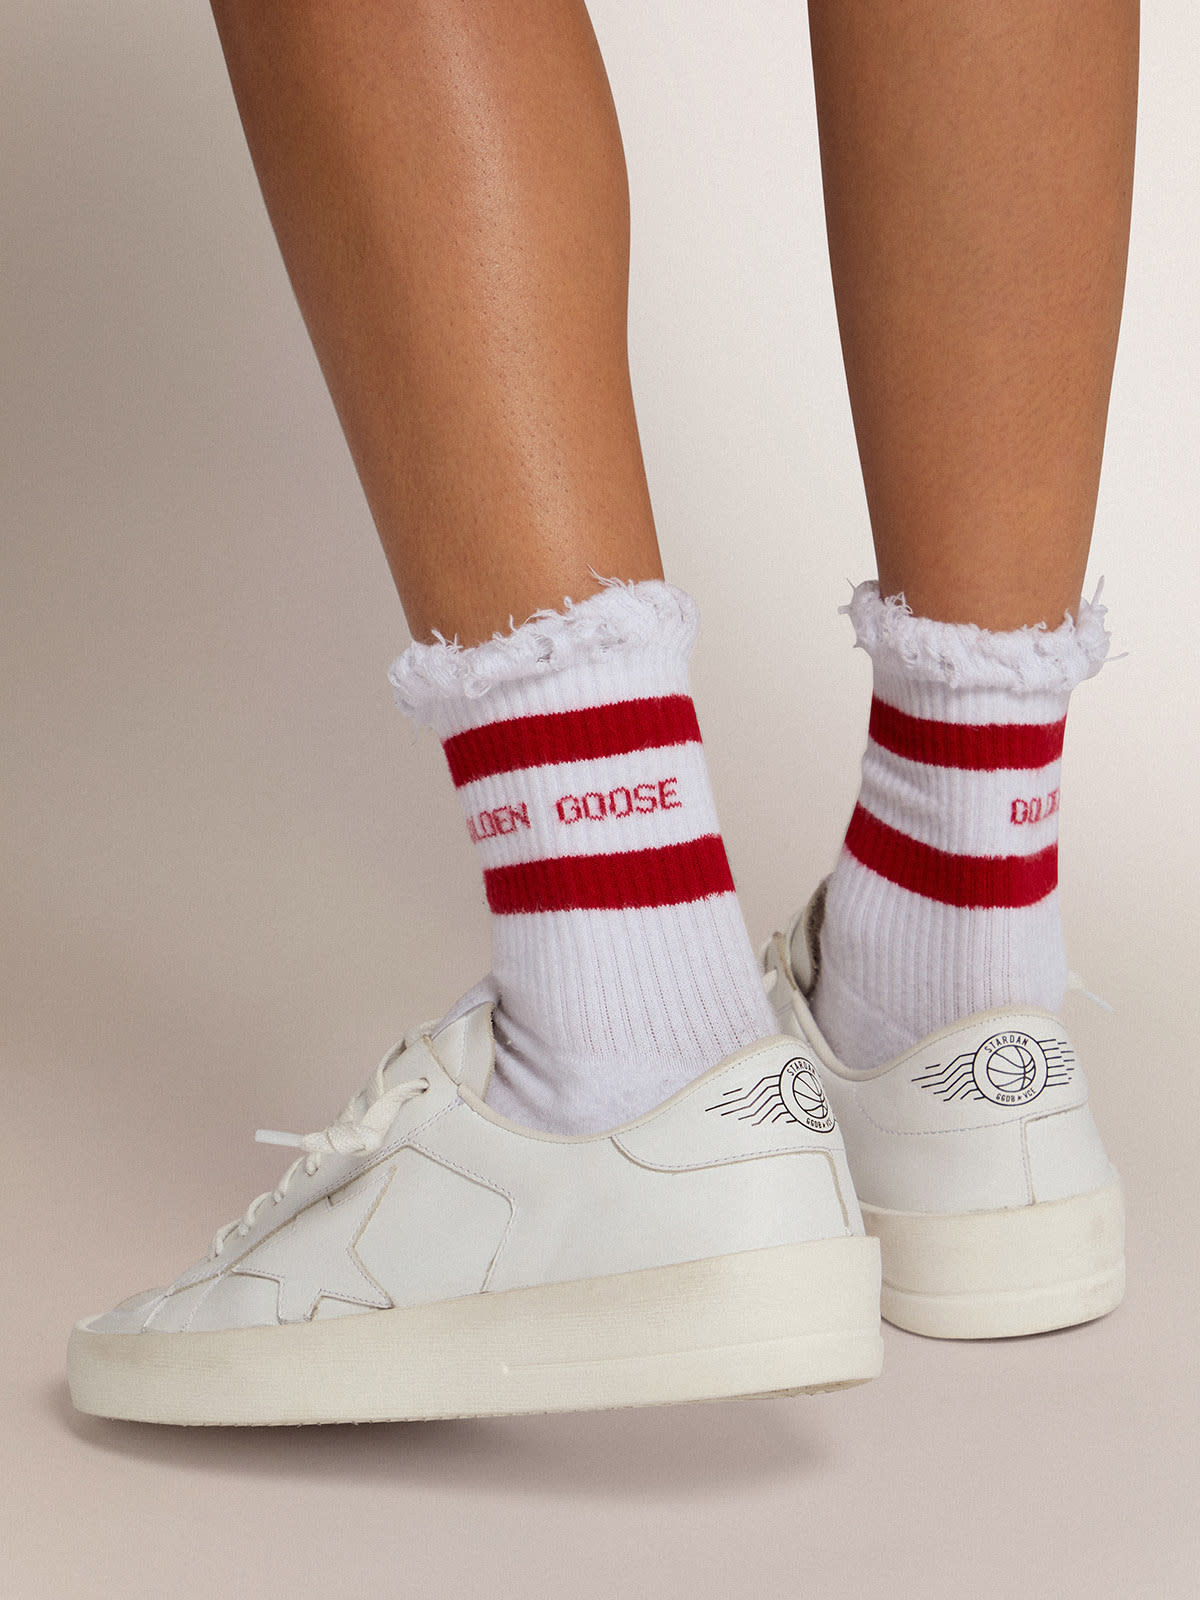 Golden Goose - Cotton socks with distressed finishes, red stripes and logo in 